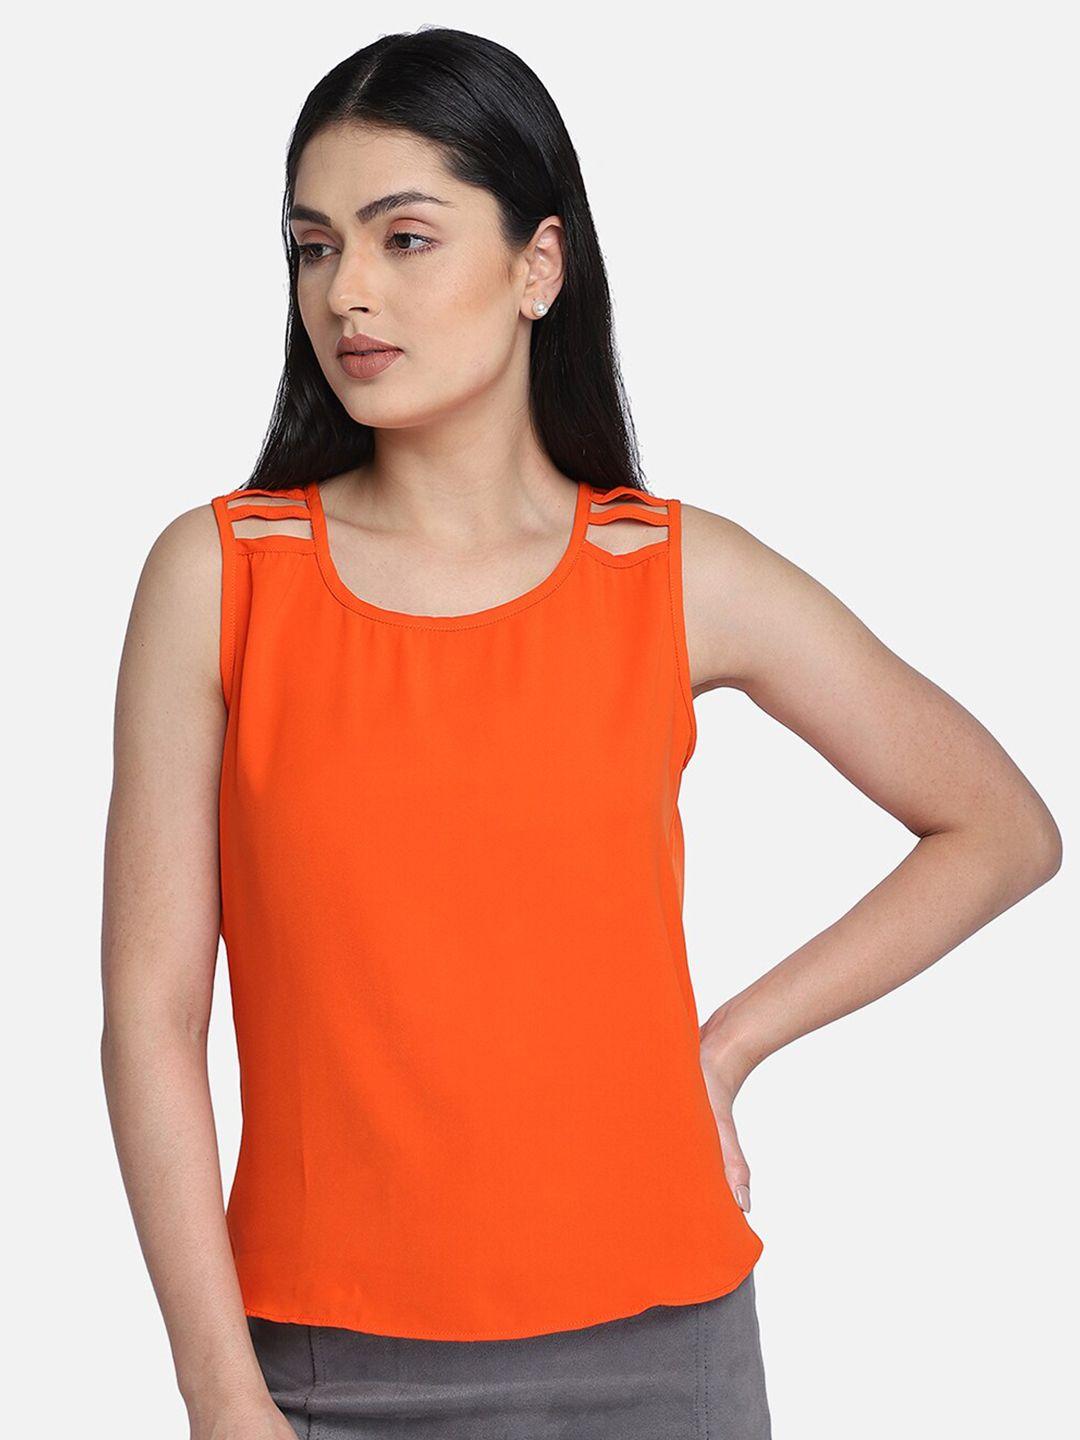 smarty pants orange cotton styled back top